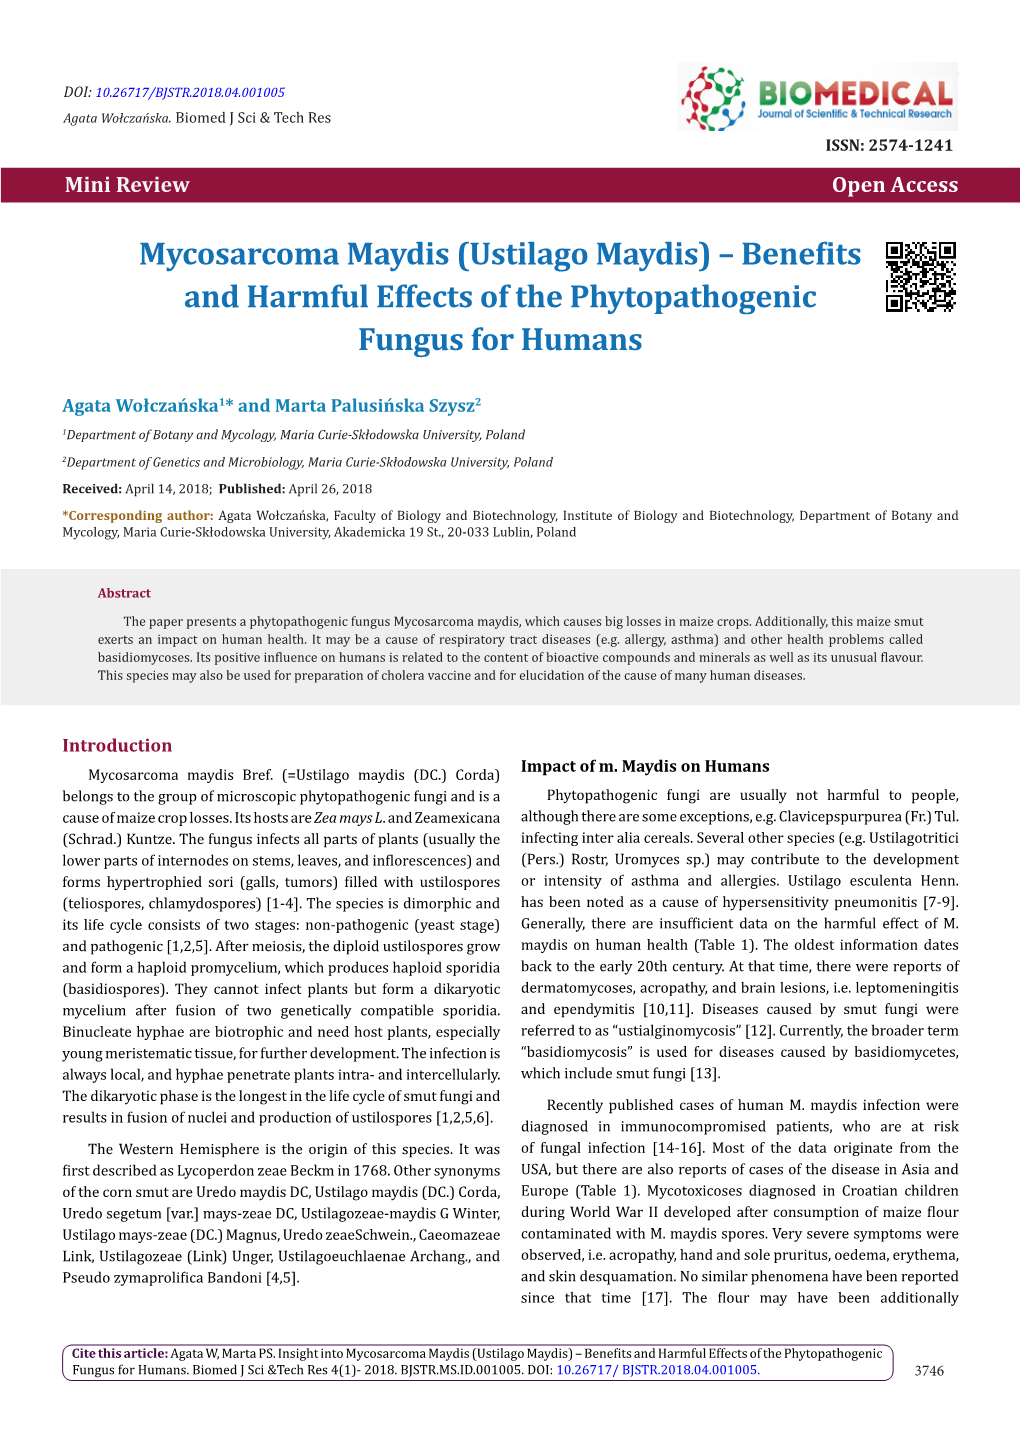 Ustilago Maydis) – Benefits and Harmful Effects of the Phytopathogenic Fungus for Humans